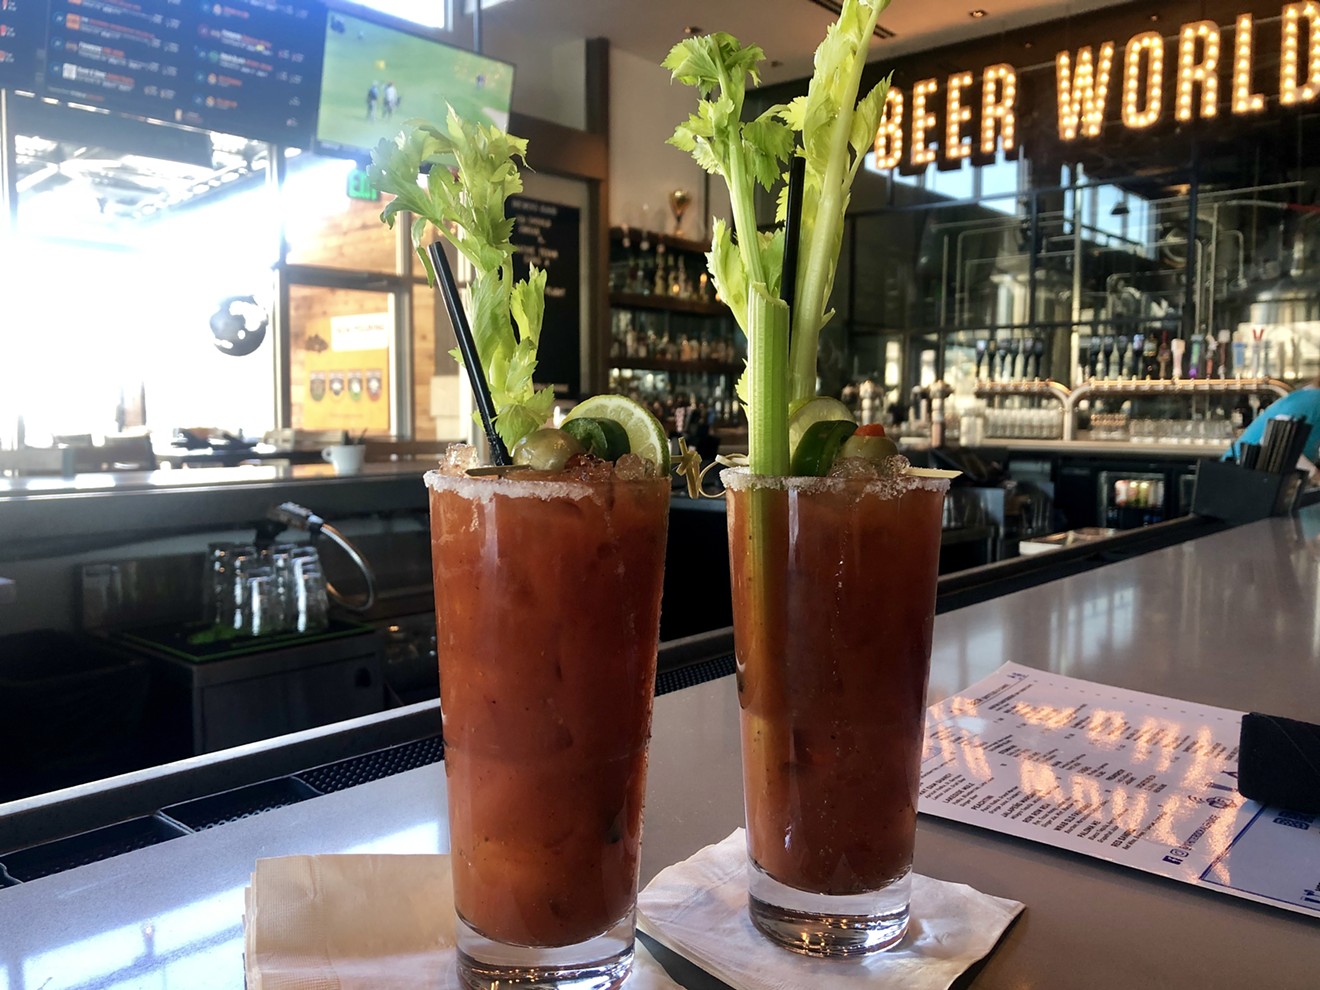 The best part of brunch at this place is their version of the Bloody Mary: perfectly spicy and drinkable. If you like them as much as we did, just remember they’re $10 a pop.